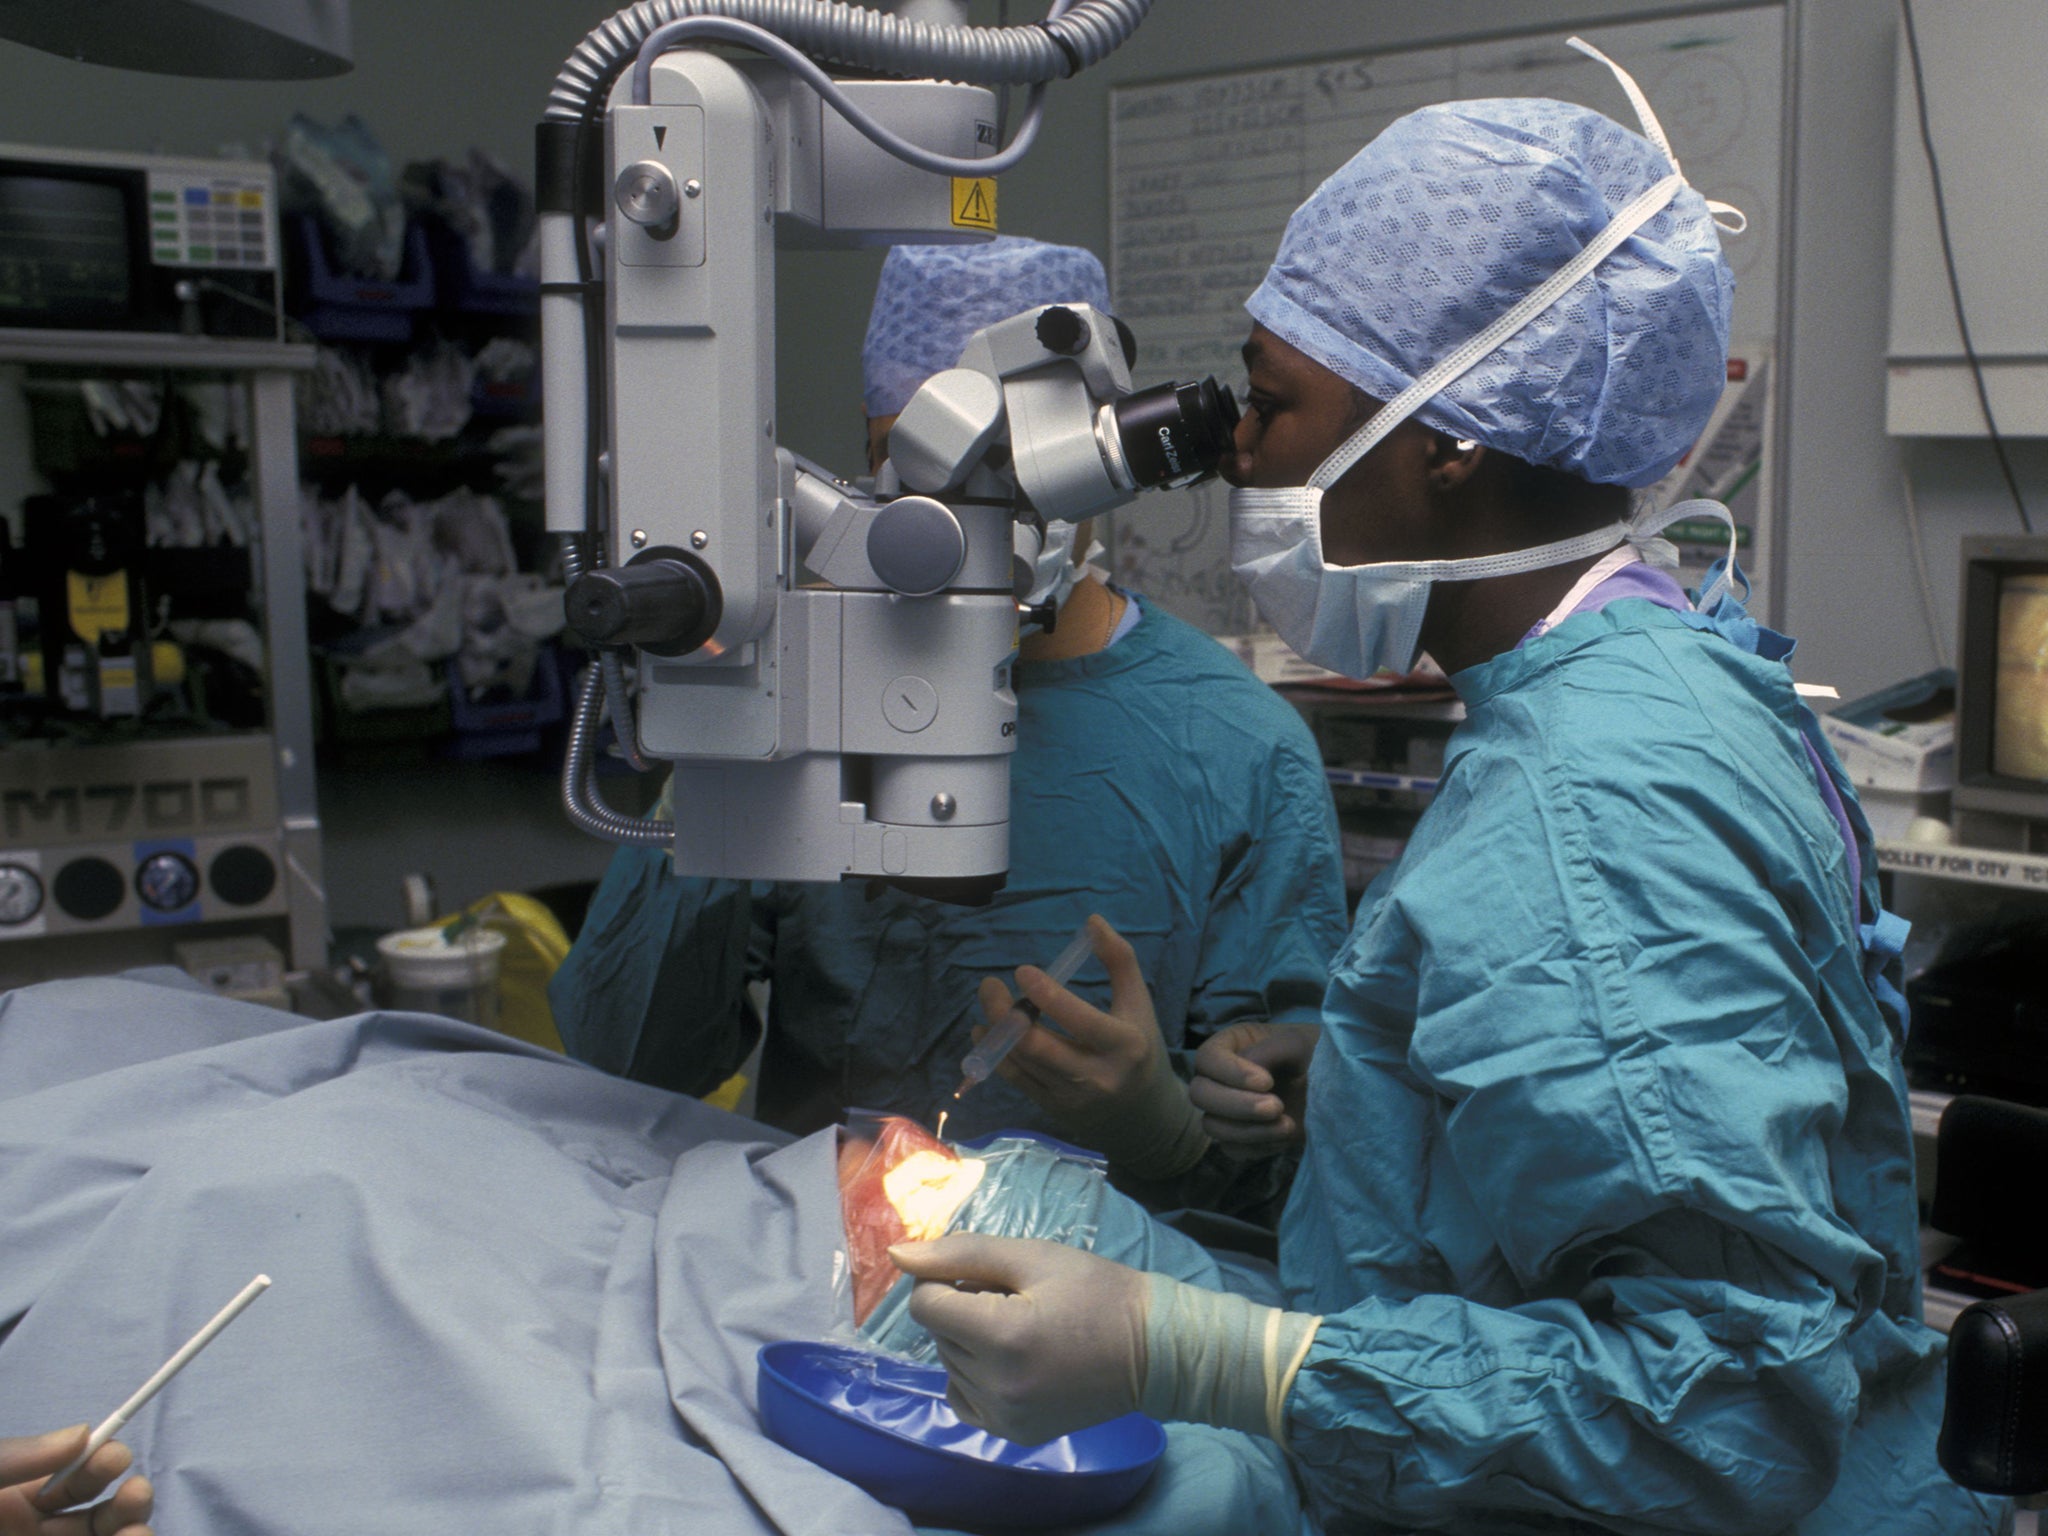 FILE PHOTO: The groundbreaking operation was carried out be surgeons at London’s Moorfields Eye Hospital